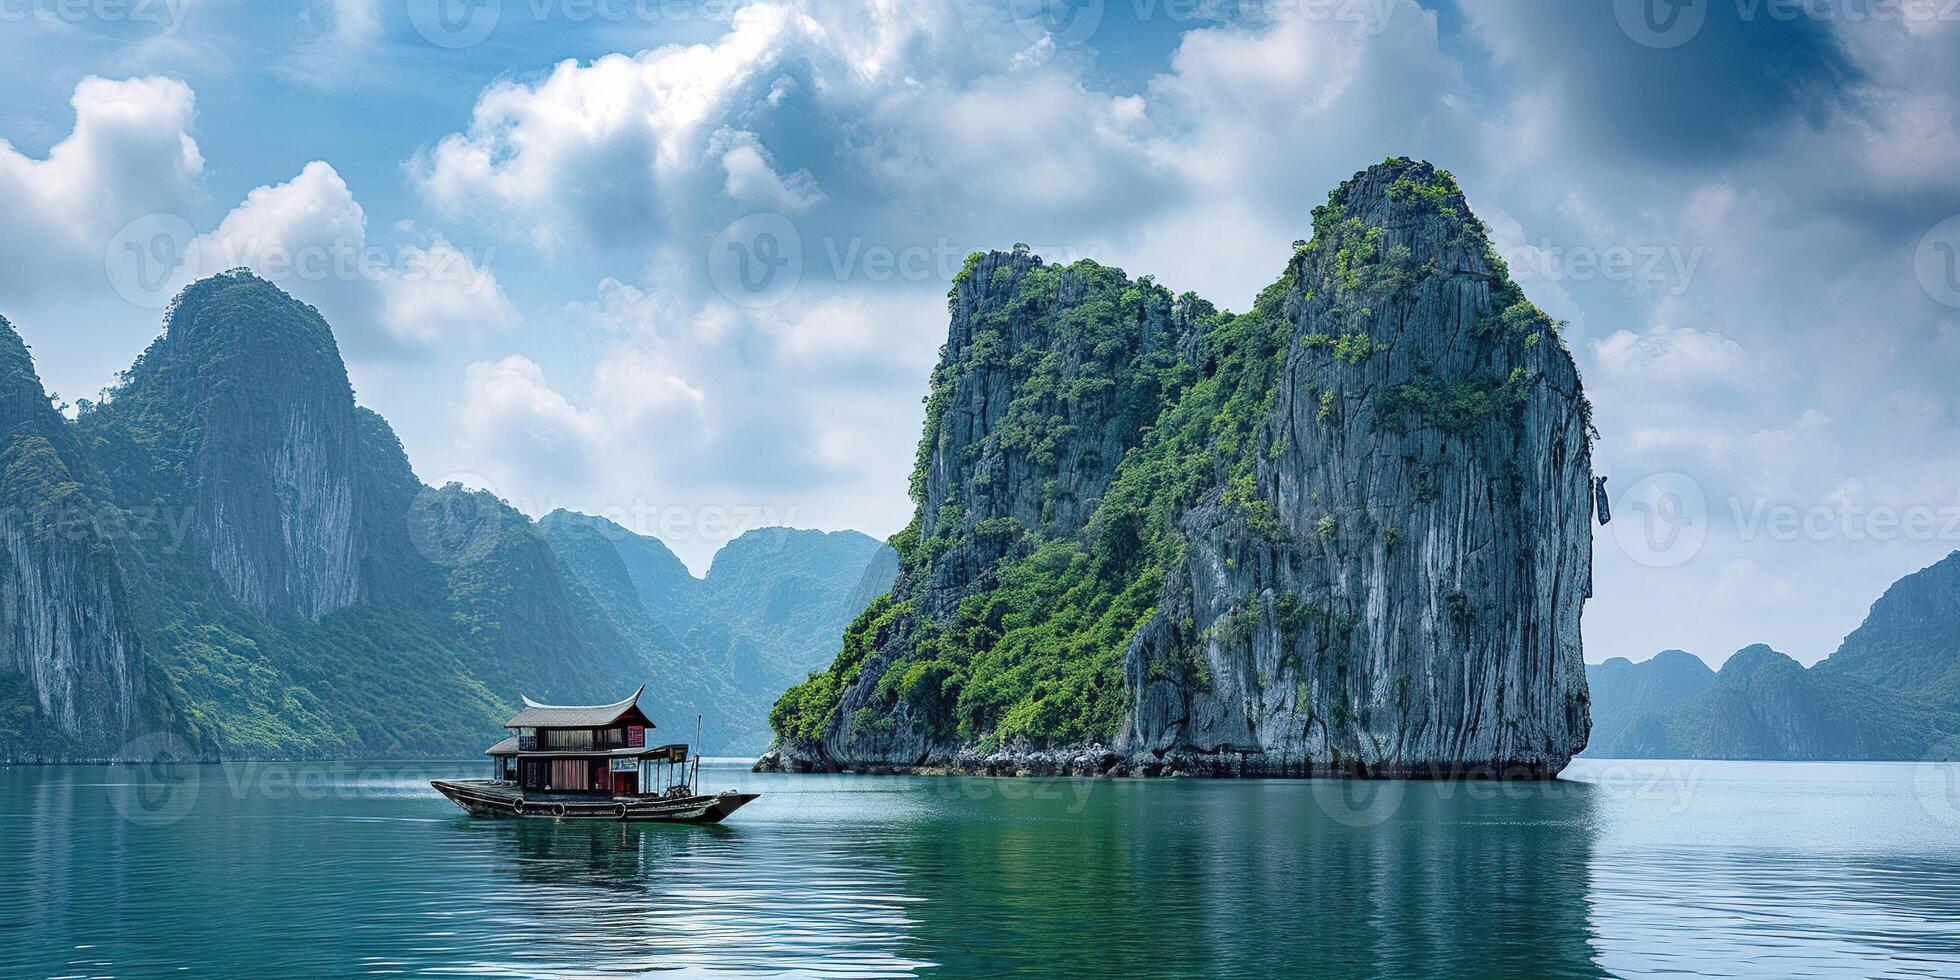 AI generated Ha Long Bay, Halong bay World Heritage Site, limestone islands, emerald waters with boats in province, Vietnam. Travel destination, natural wonder landscape background wallpaper photo